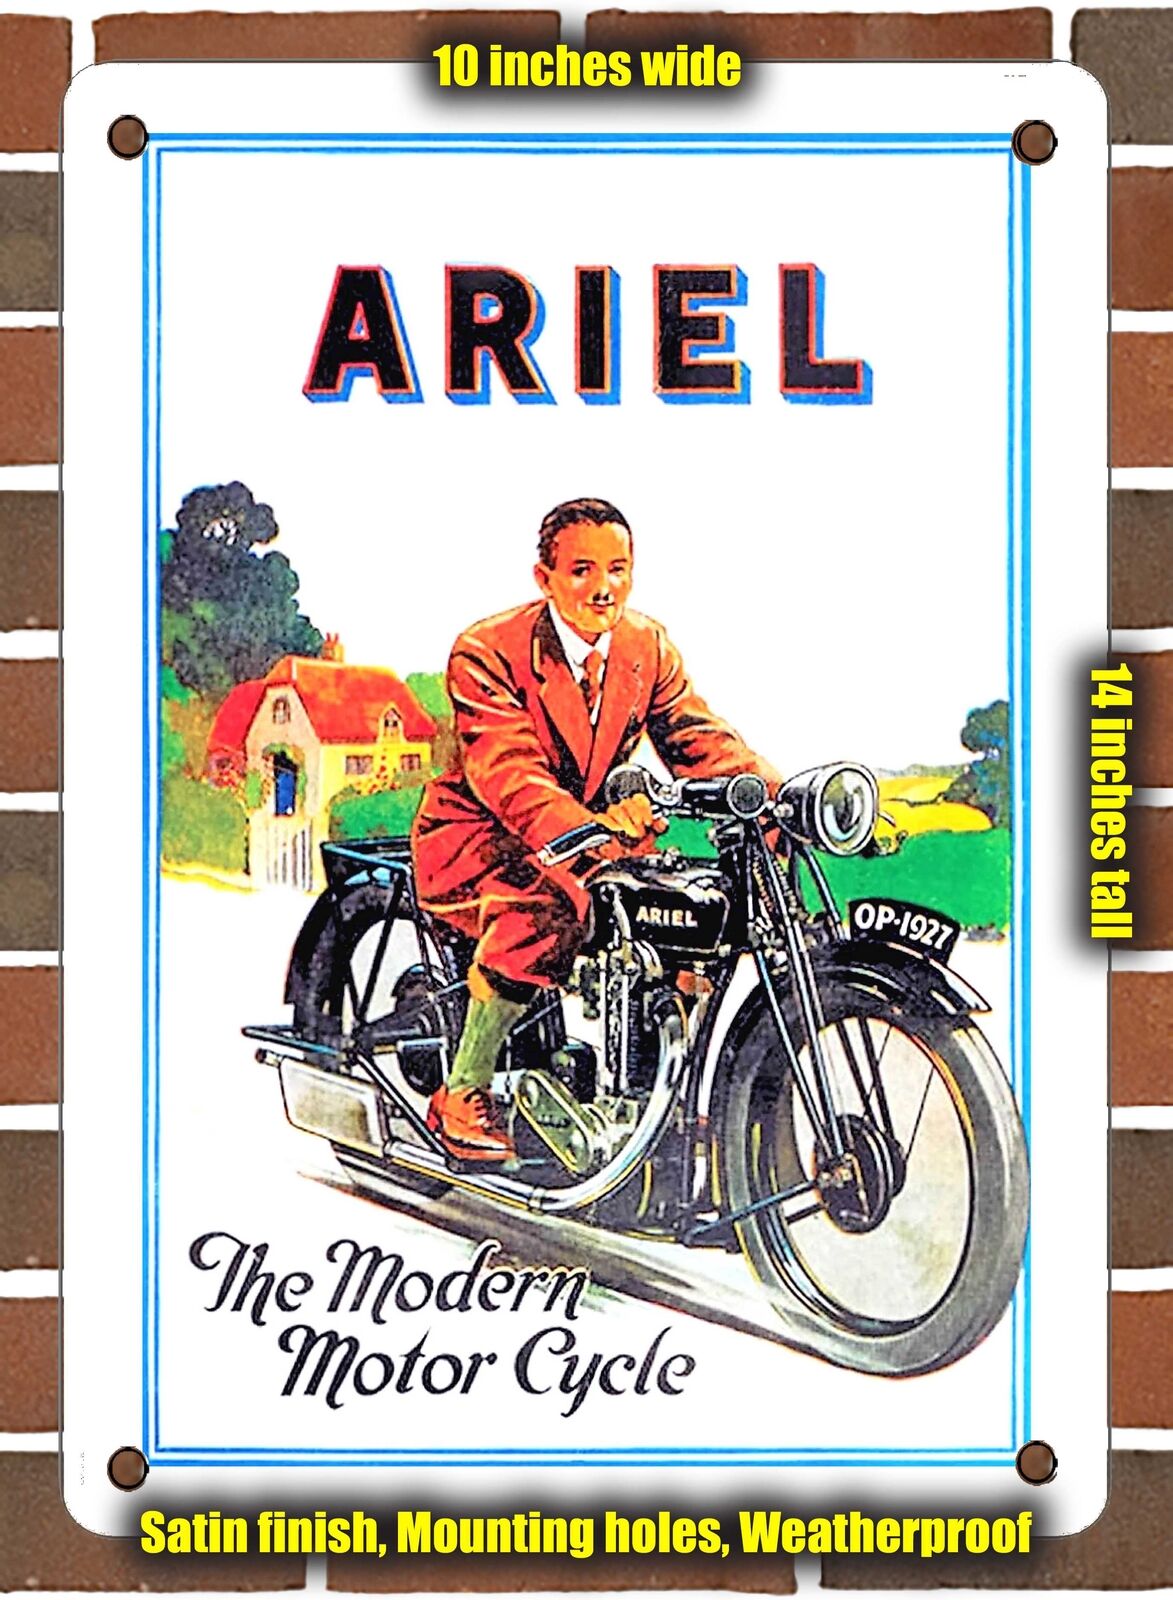 METAL SIGN - 1927 Ariel the Modern Motorcycle - 10x14 Inches